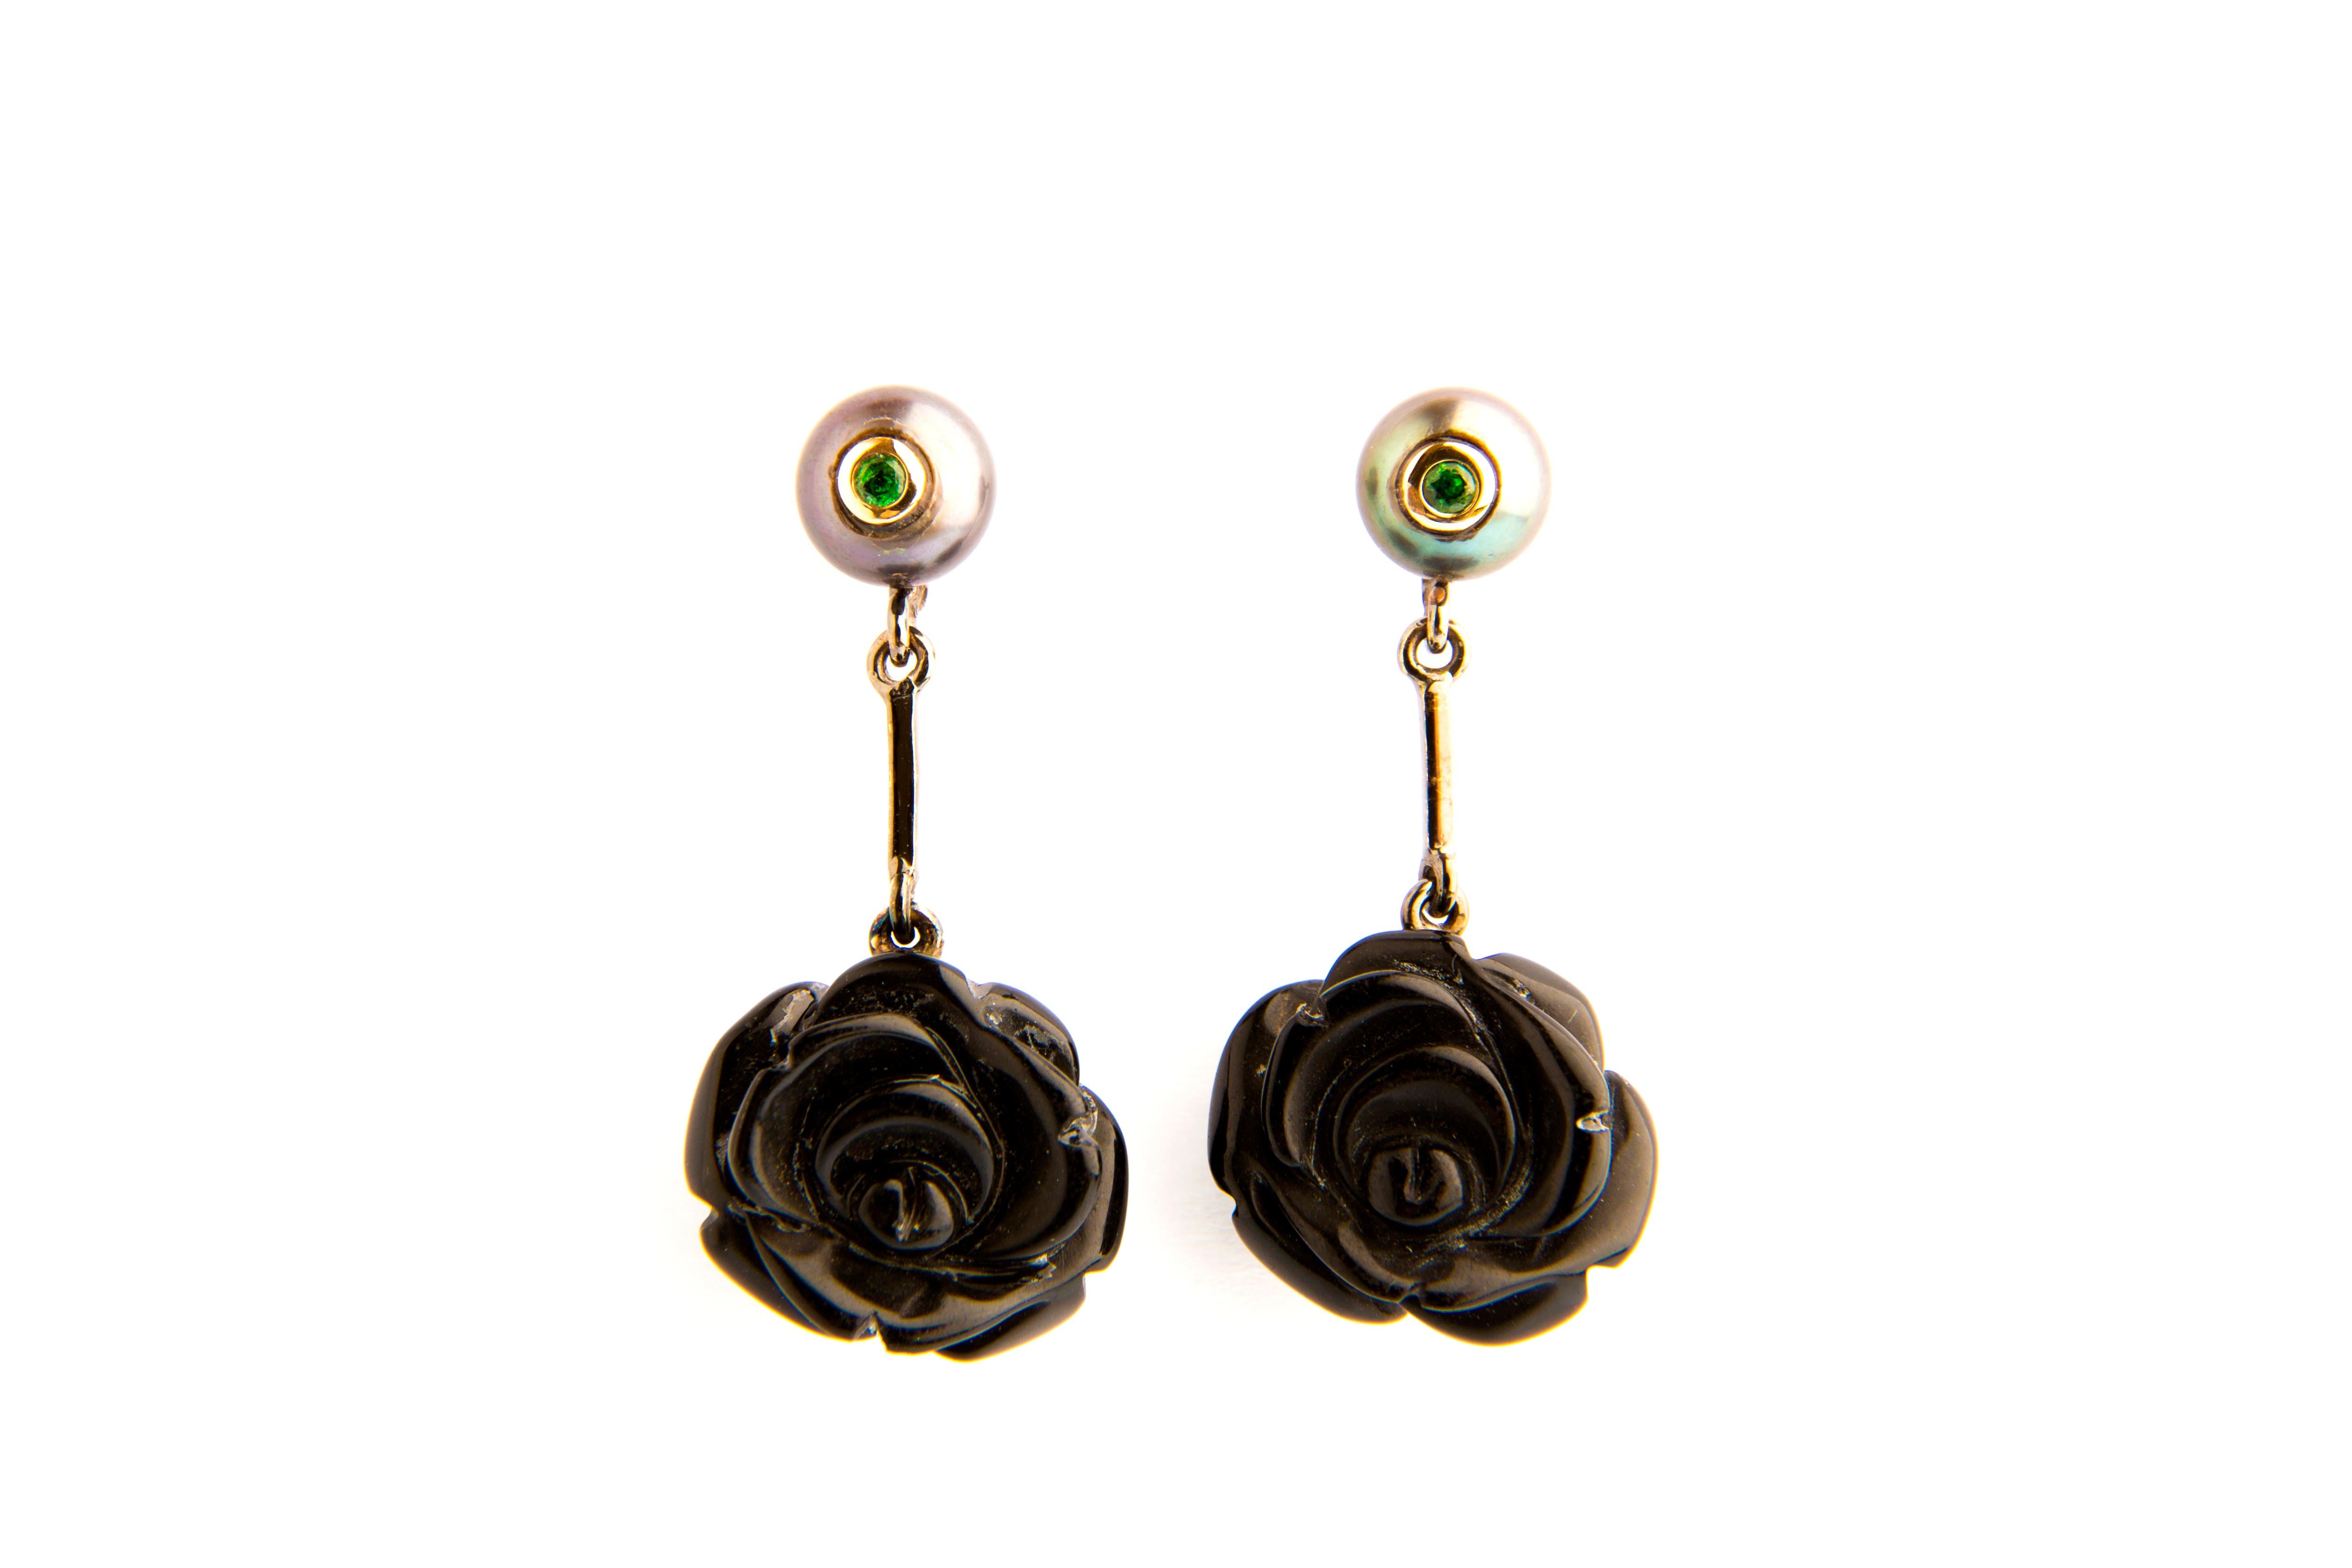 onyx roses
small tsavorites surrounded by fine grey sweet water pearls
18k yellow gold

